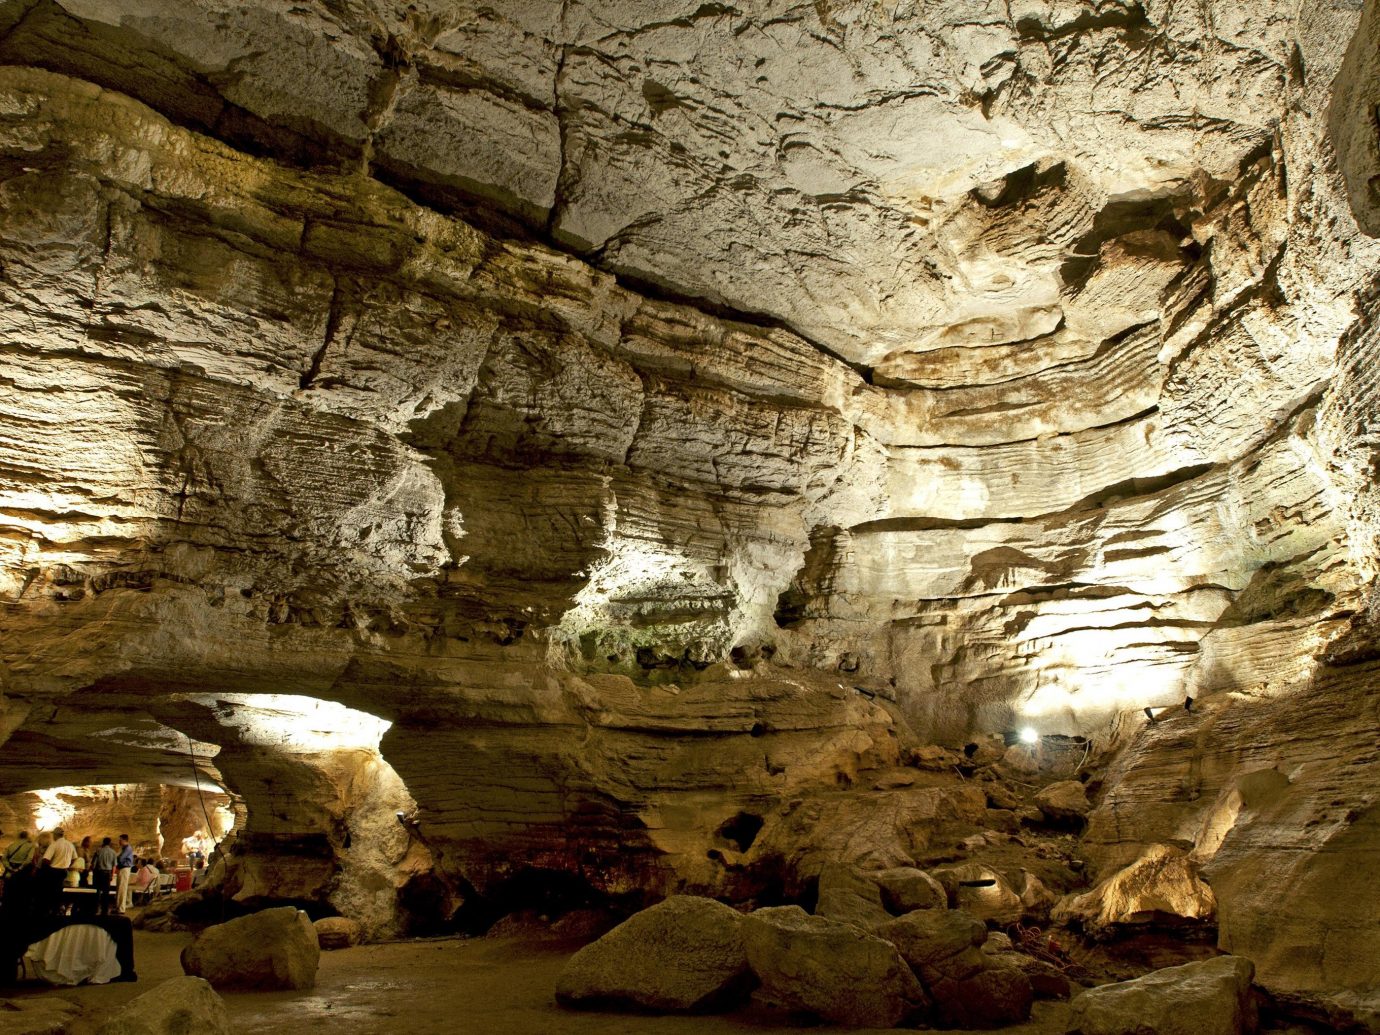 Trip Ideas rock outdoor geographical feature Nature landform cave stalagmite pit cave stone formation wadi stalactite speleothem geology